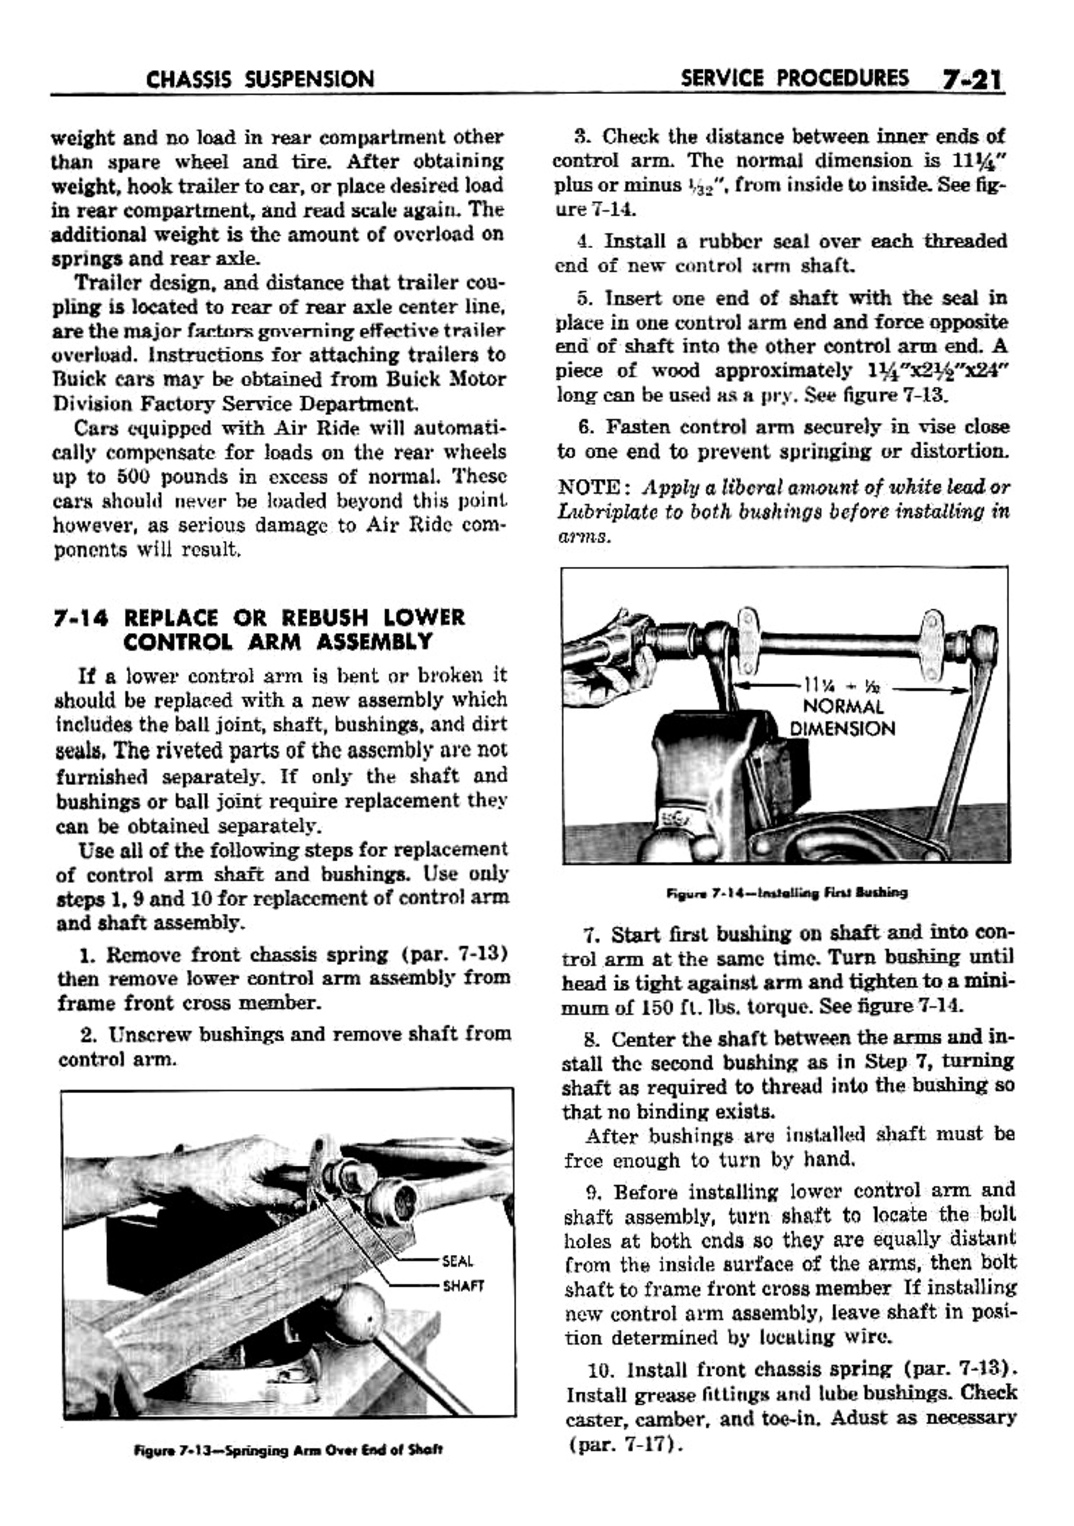 n_08 1959 Buick Shop Manual - Chassis Suspension-021-021.jpg